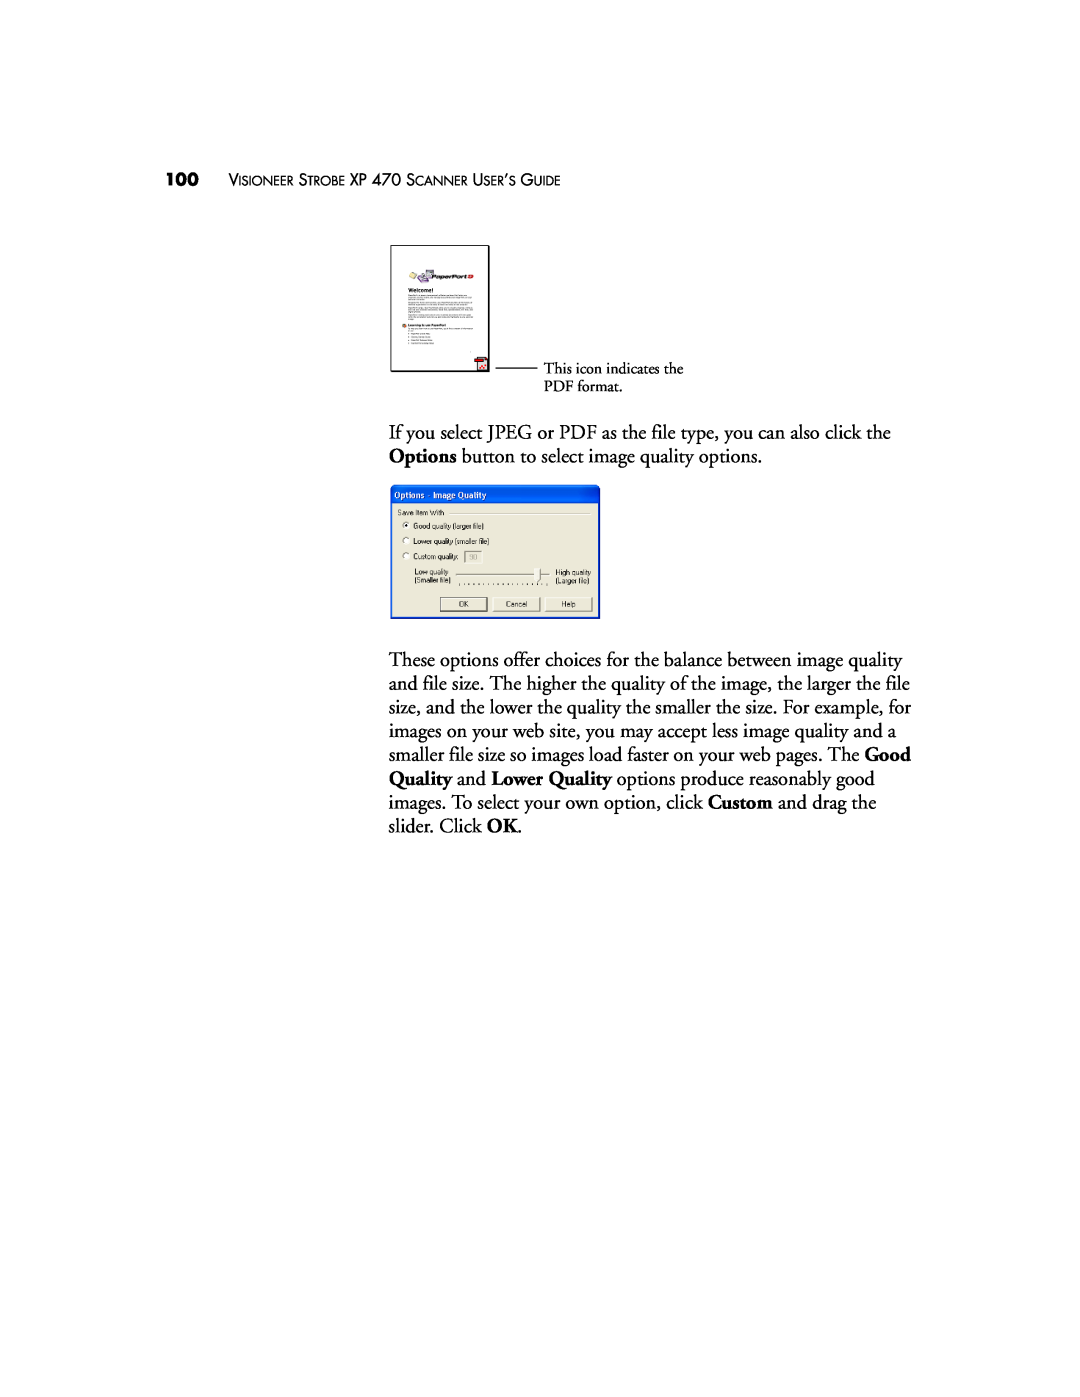 Visioneer XP 470 manual If you select JPEG or PDF as the file type, you can also click the 